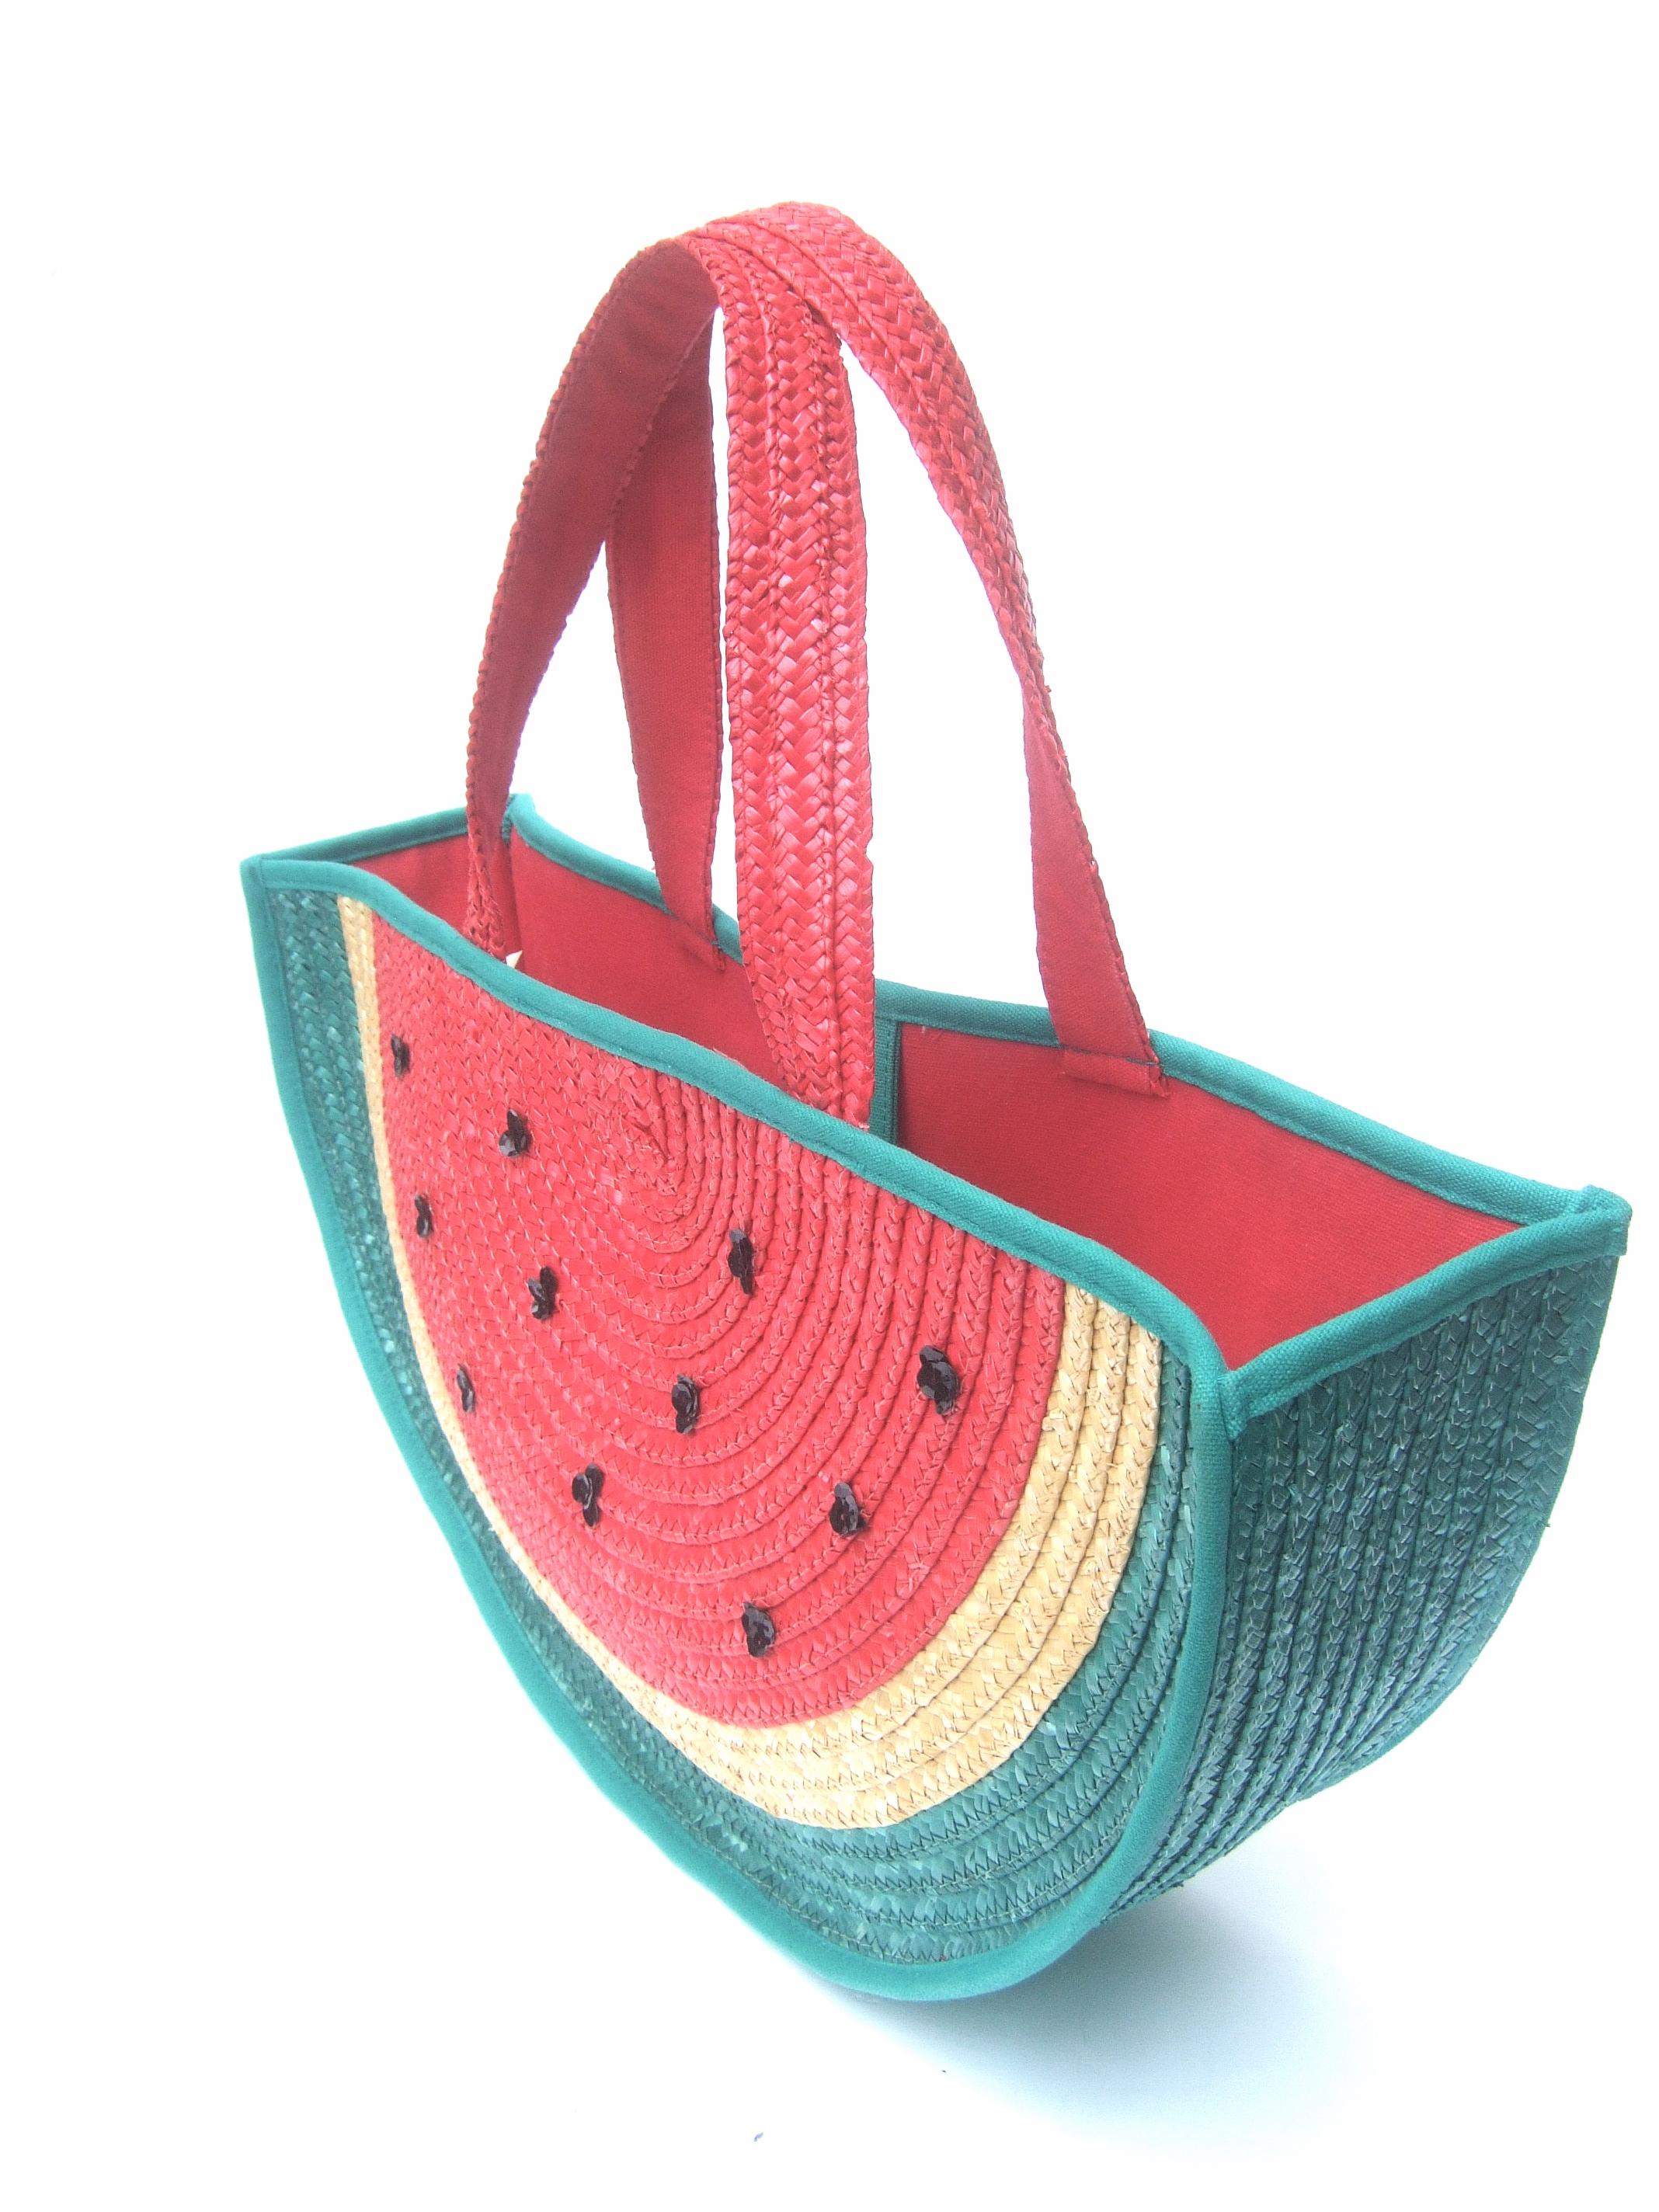 Lulu Guinness London Whimsical Watermelon Tote Handbag c 1990s In Good Condition In University City, MO